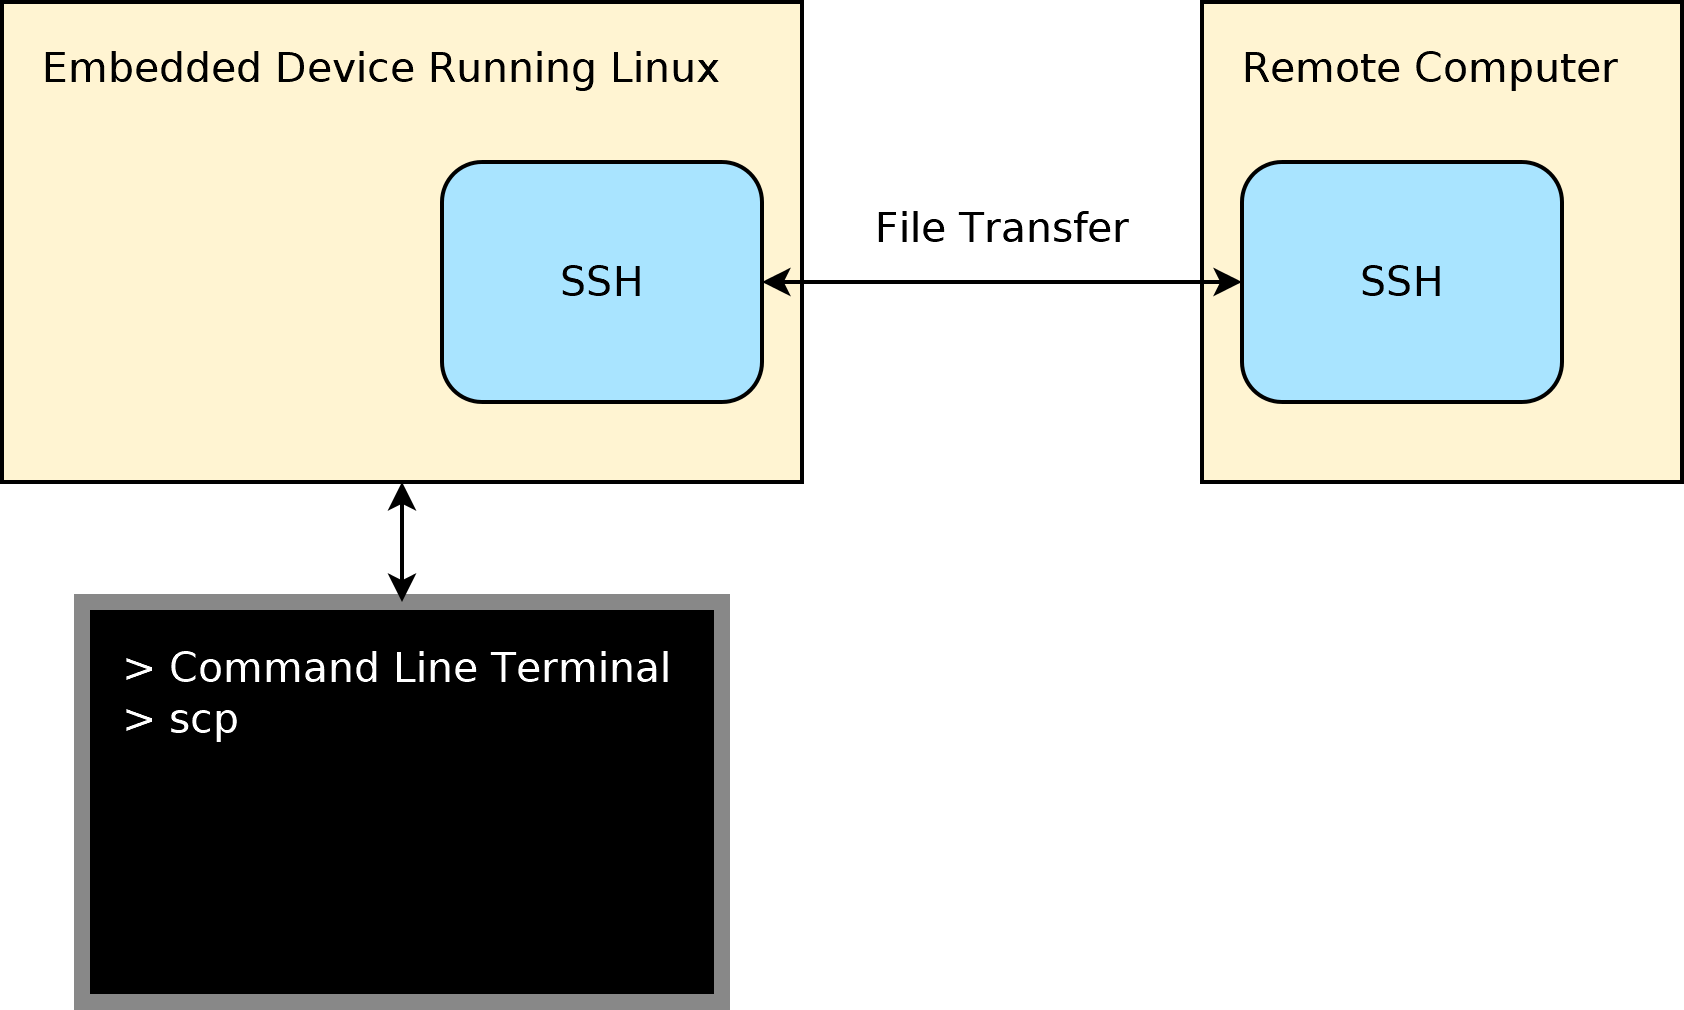 How to Use the SCP Command to Transfer Files in Linux